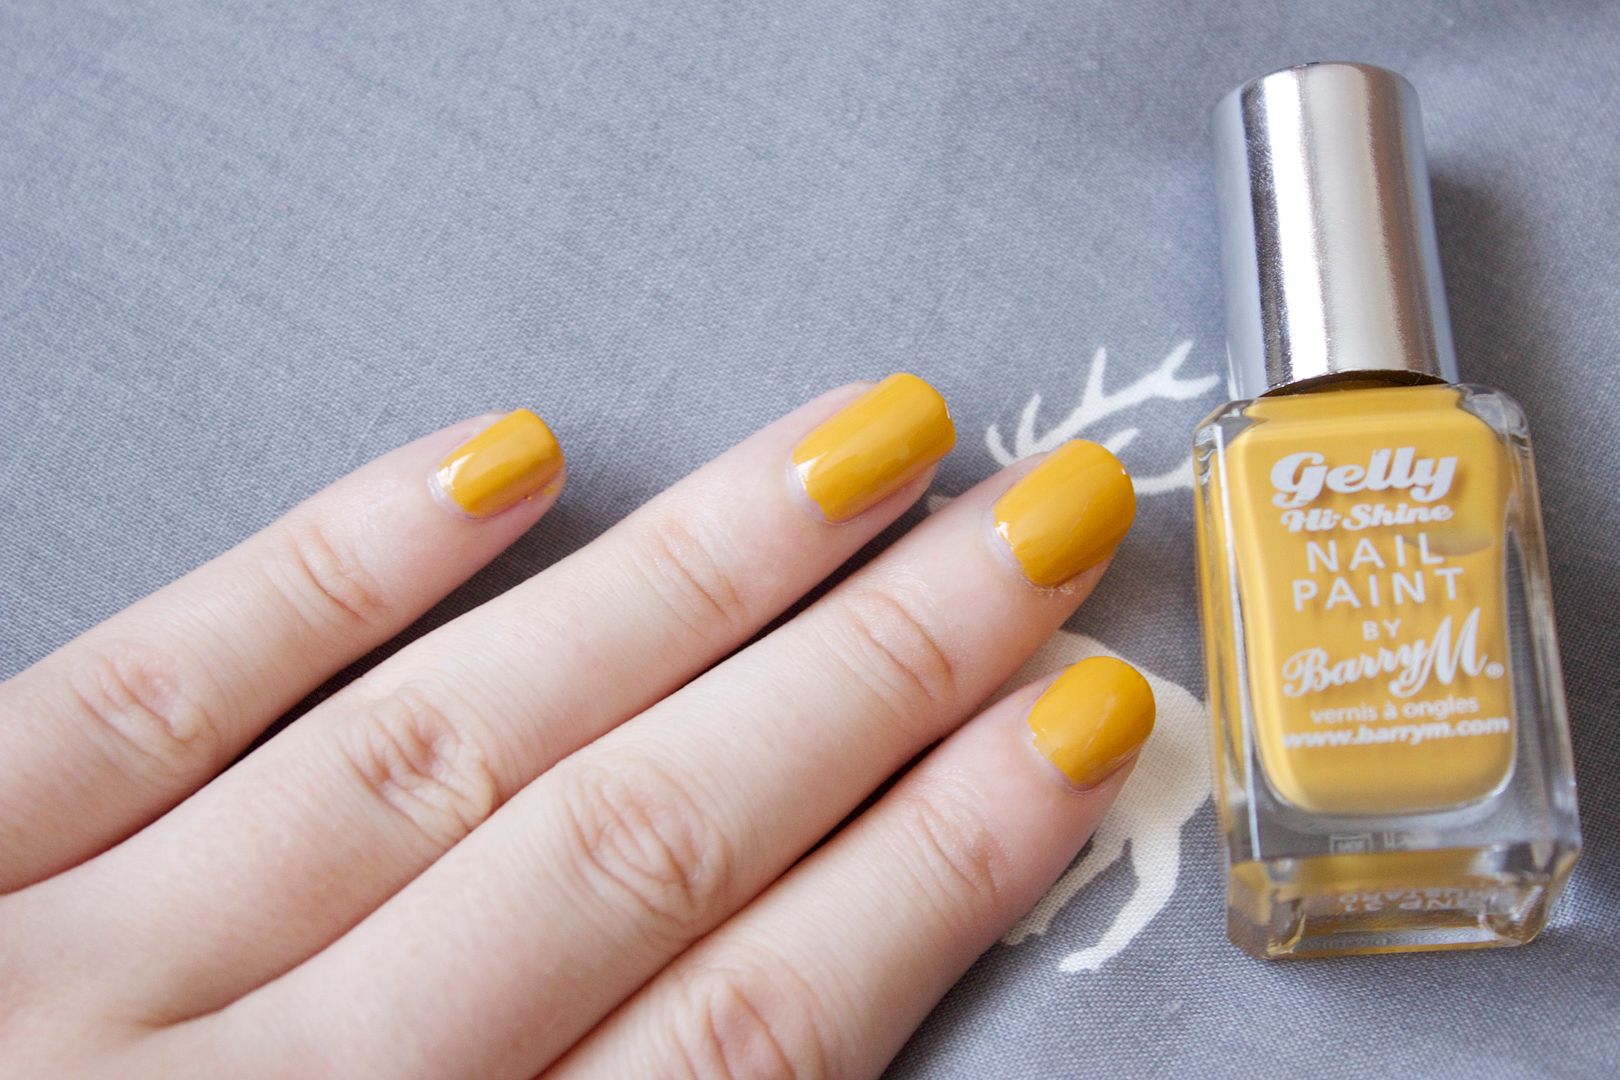 Barry M Autumn/Winter 2014 Gelly Nail Paint in Mustard